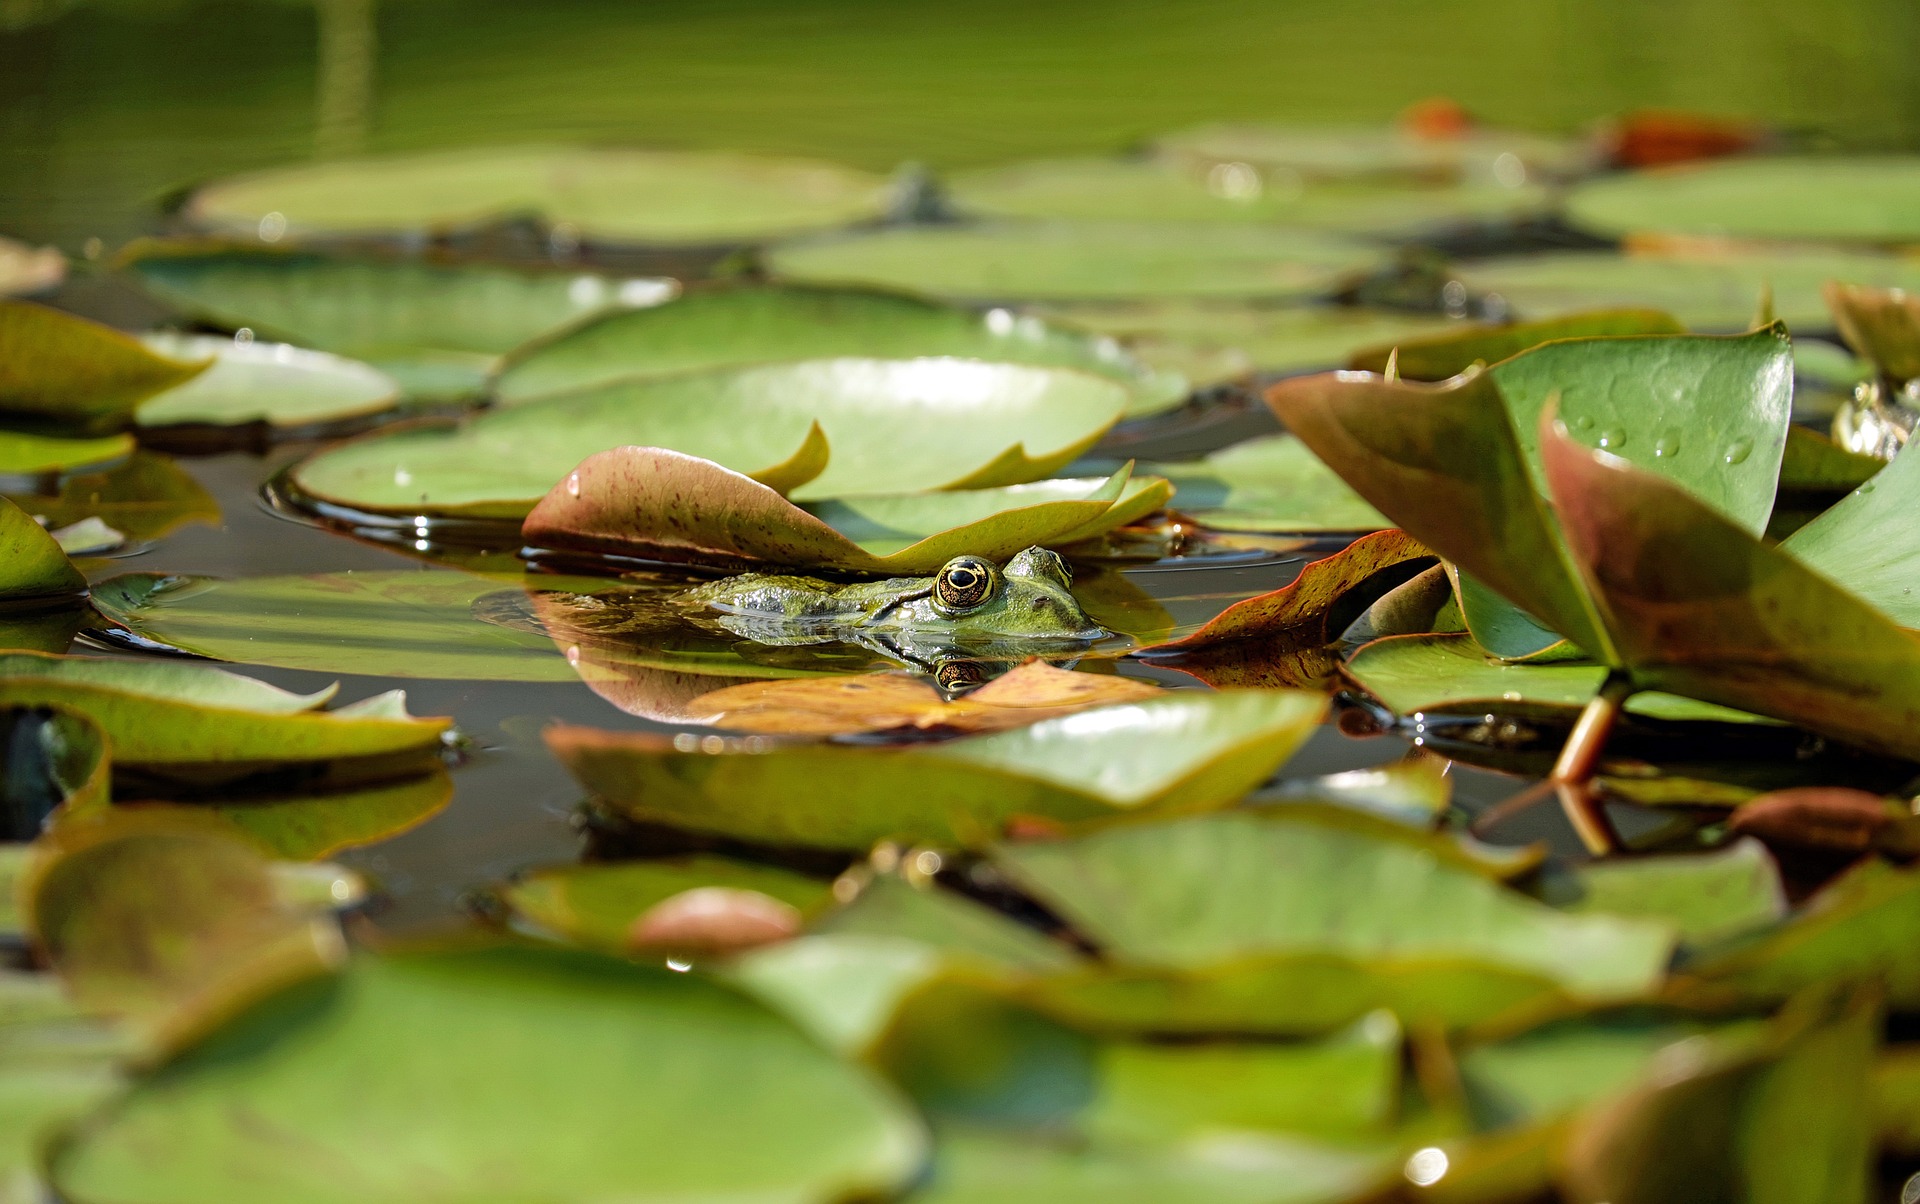 Frog in a Water Lily Pond by Couleur